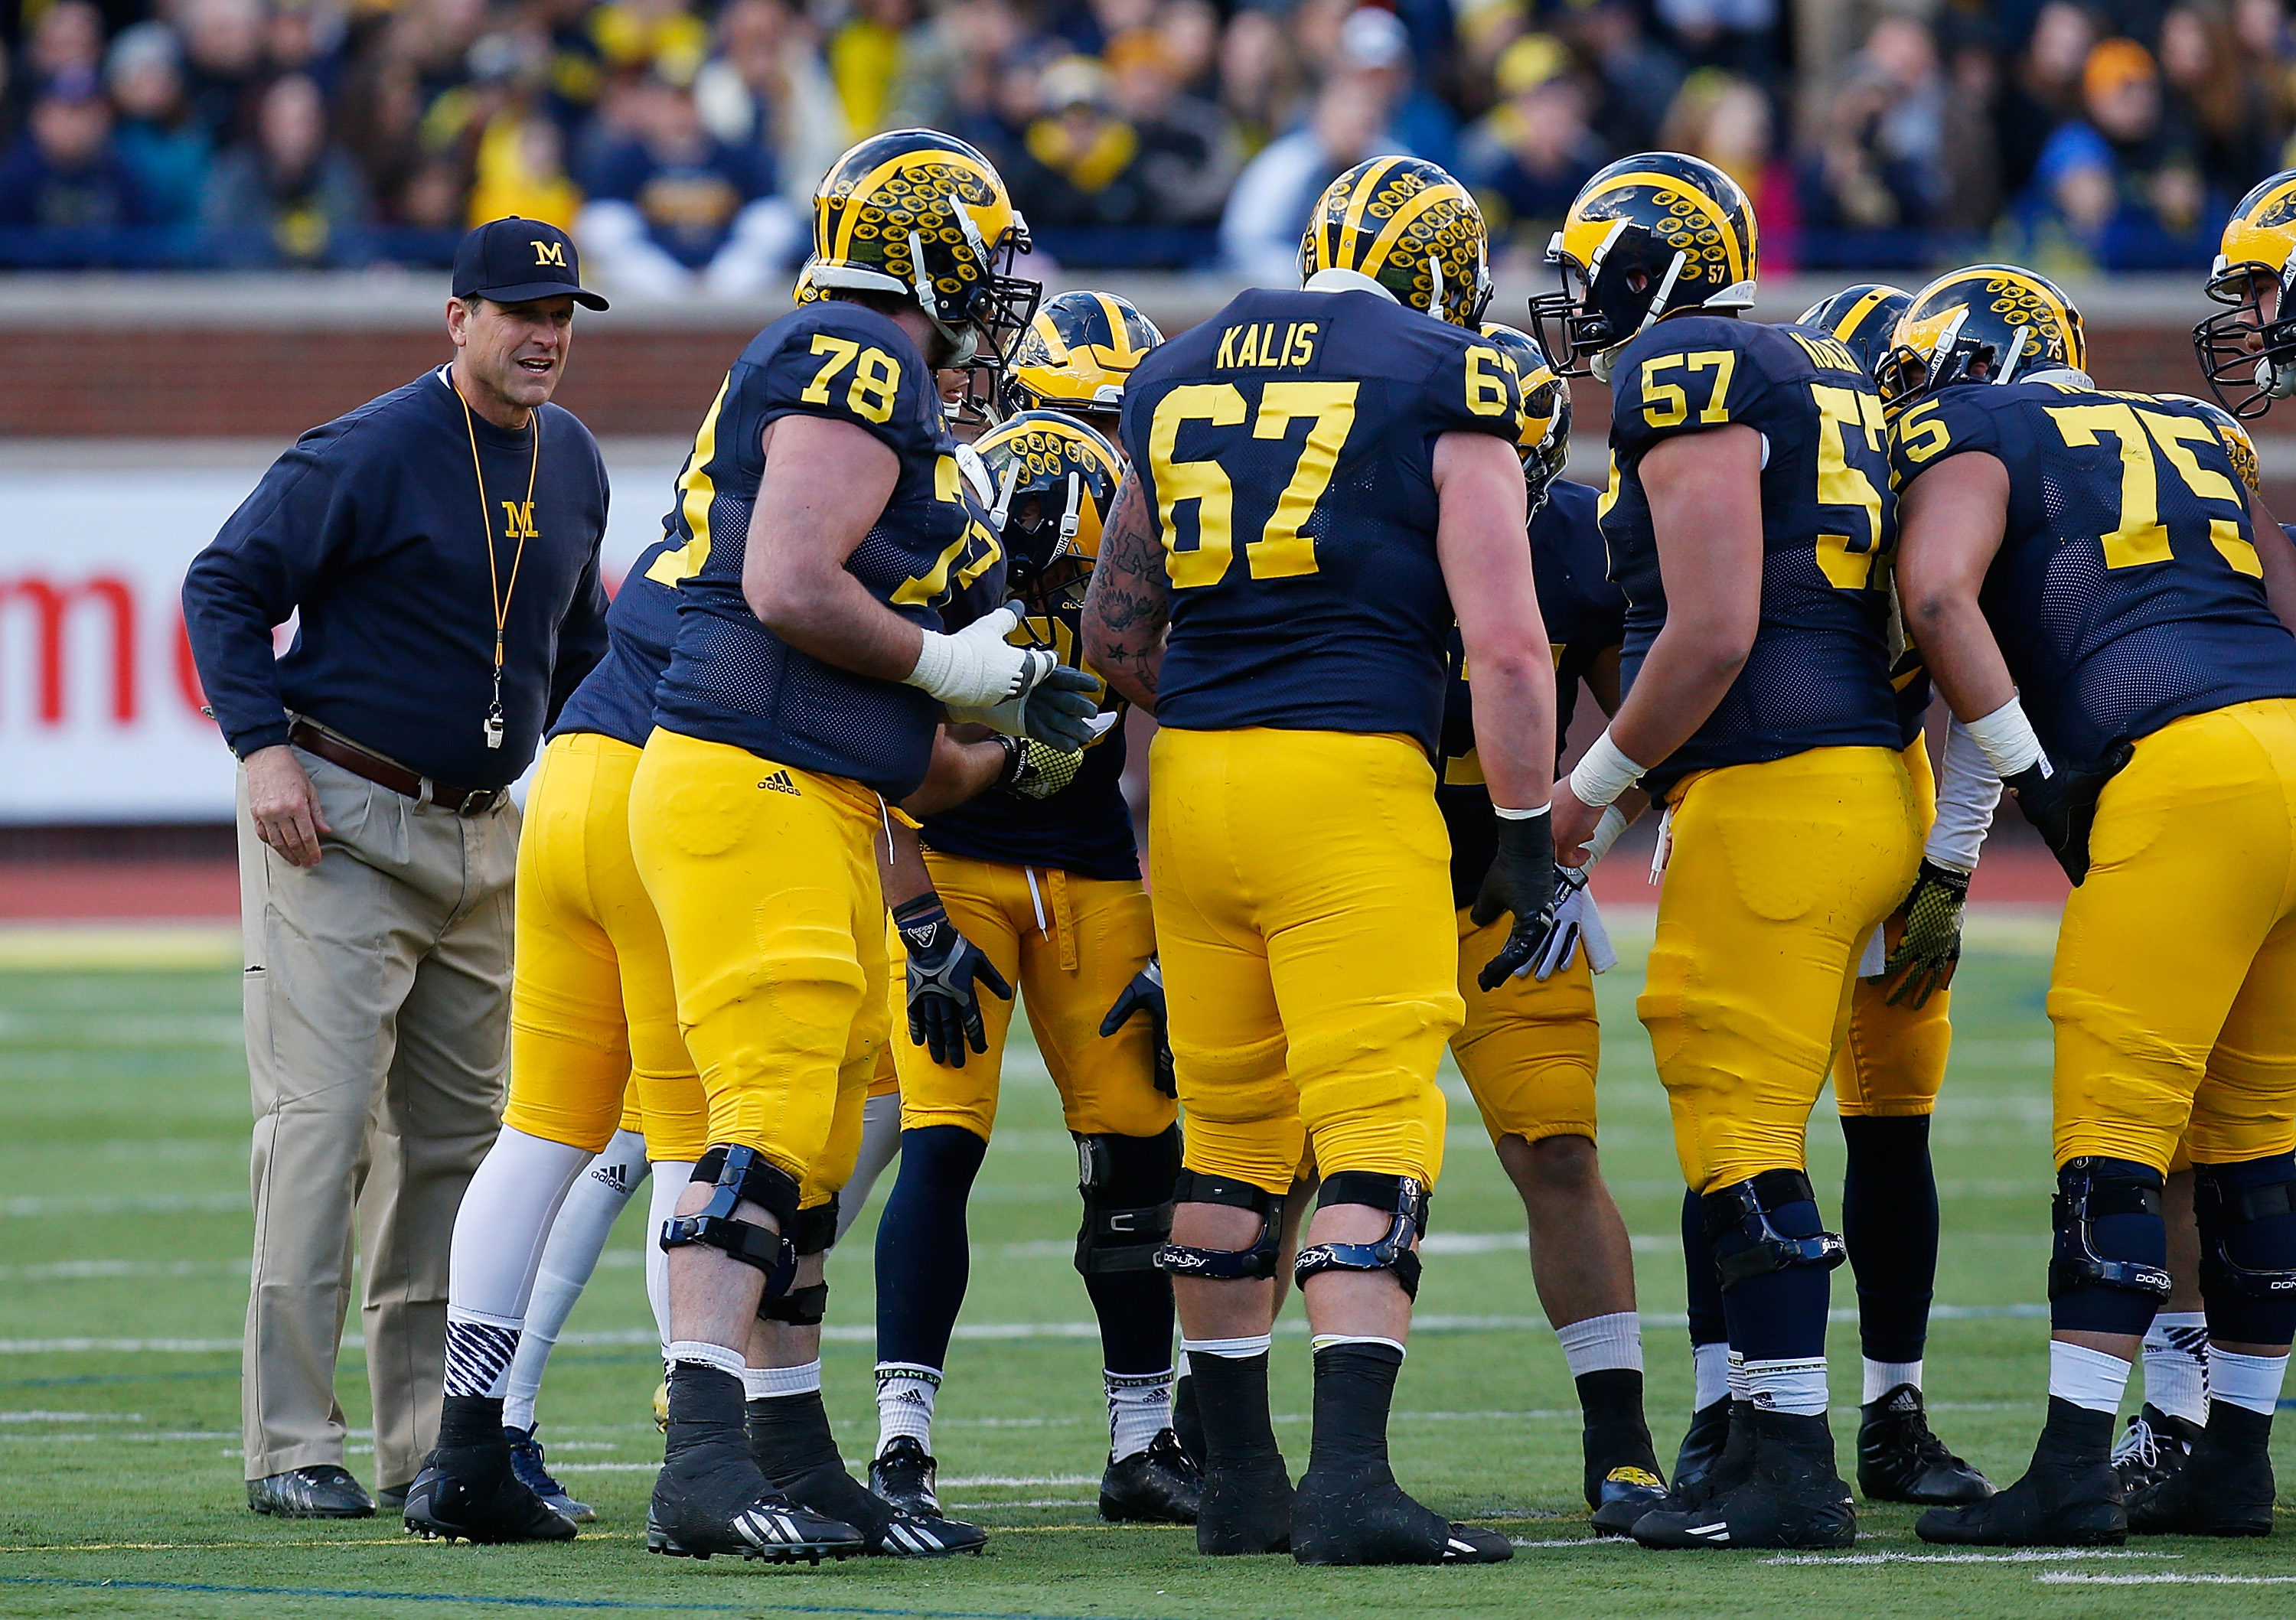 Michigan Football Players Reach Deal with 'The M Den' to License